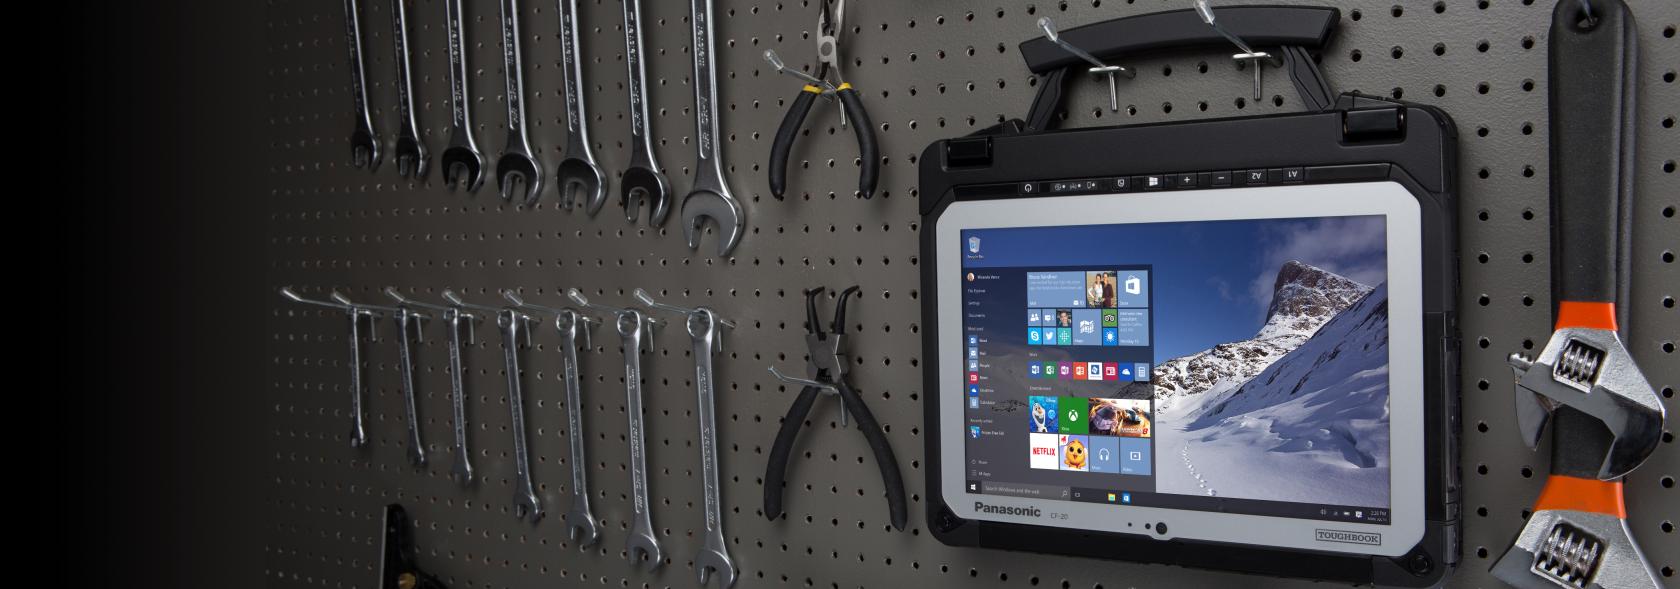 TOUGHBOOK 20 hanging on a tool board with tools